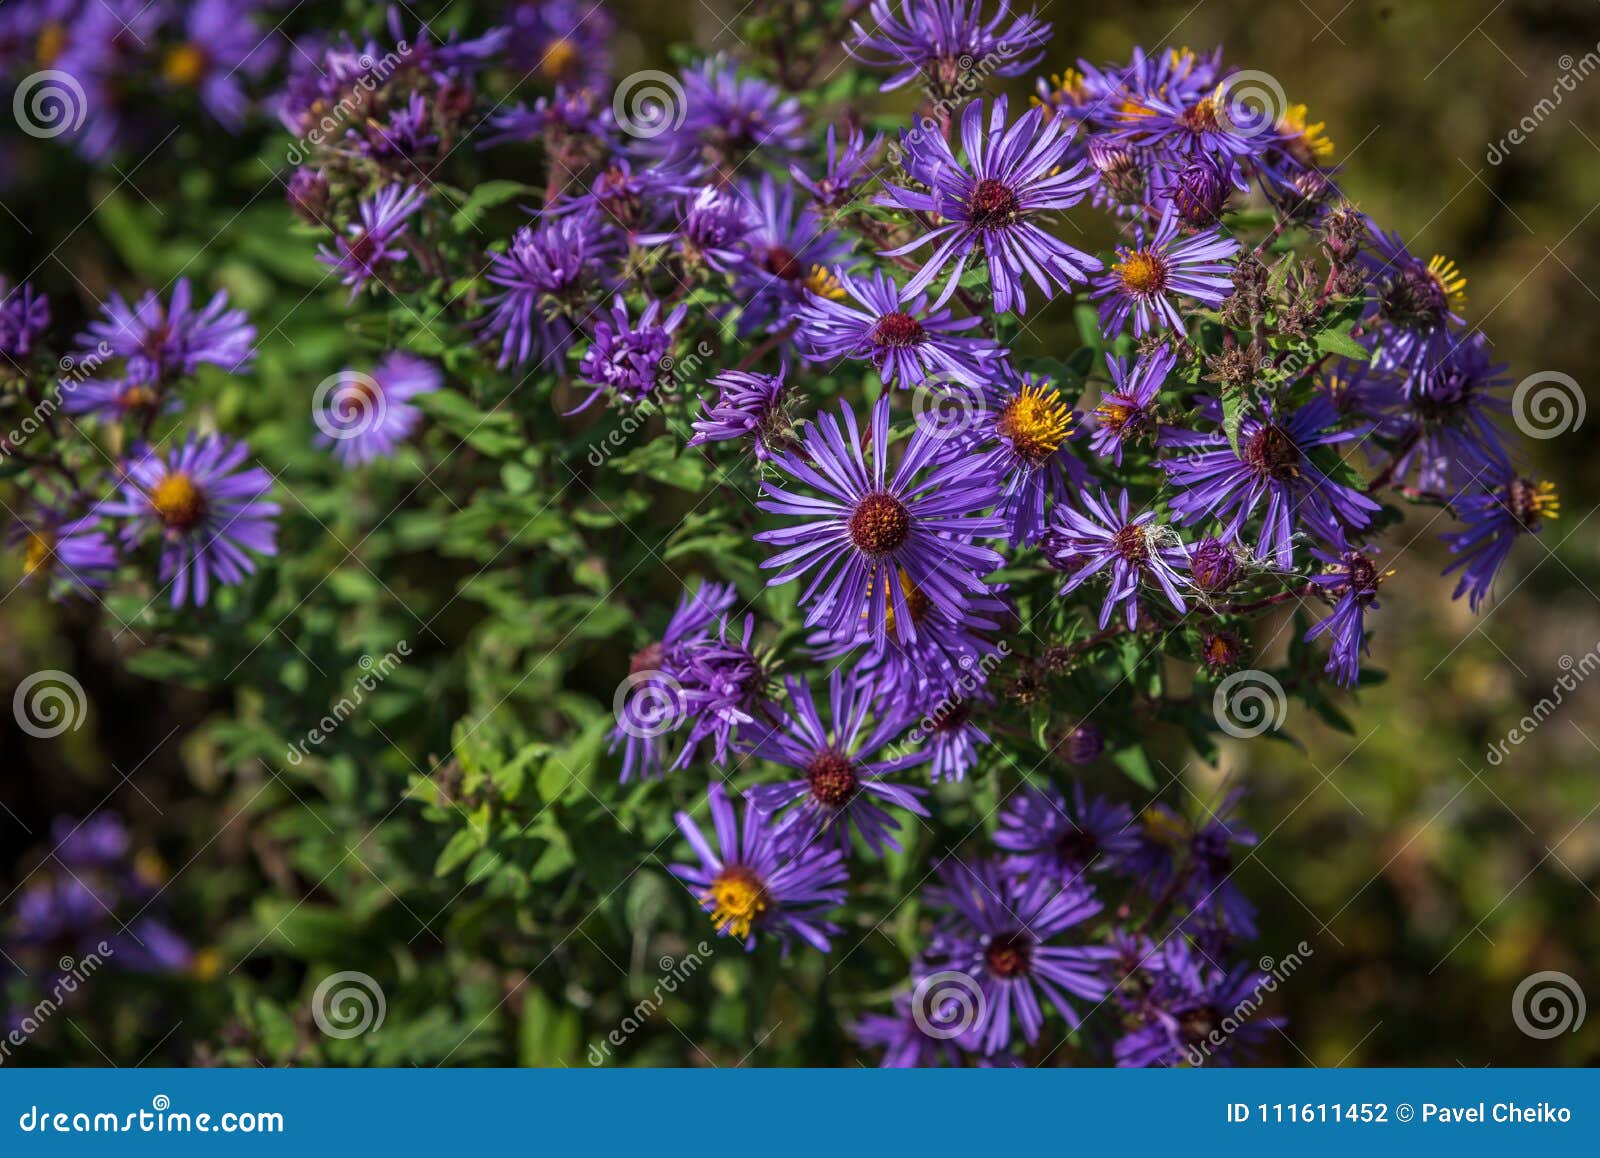 New England Aster Stock Photo Image Of Flower Flowers 111611452